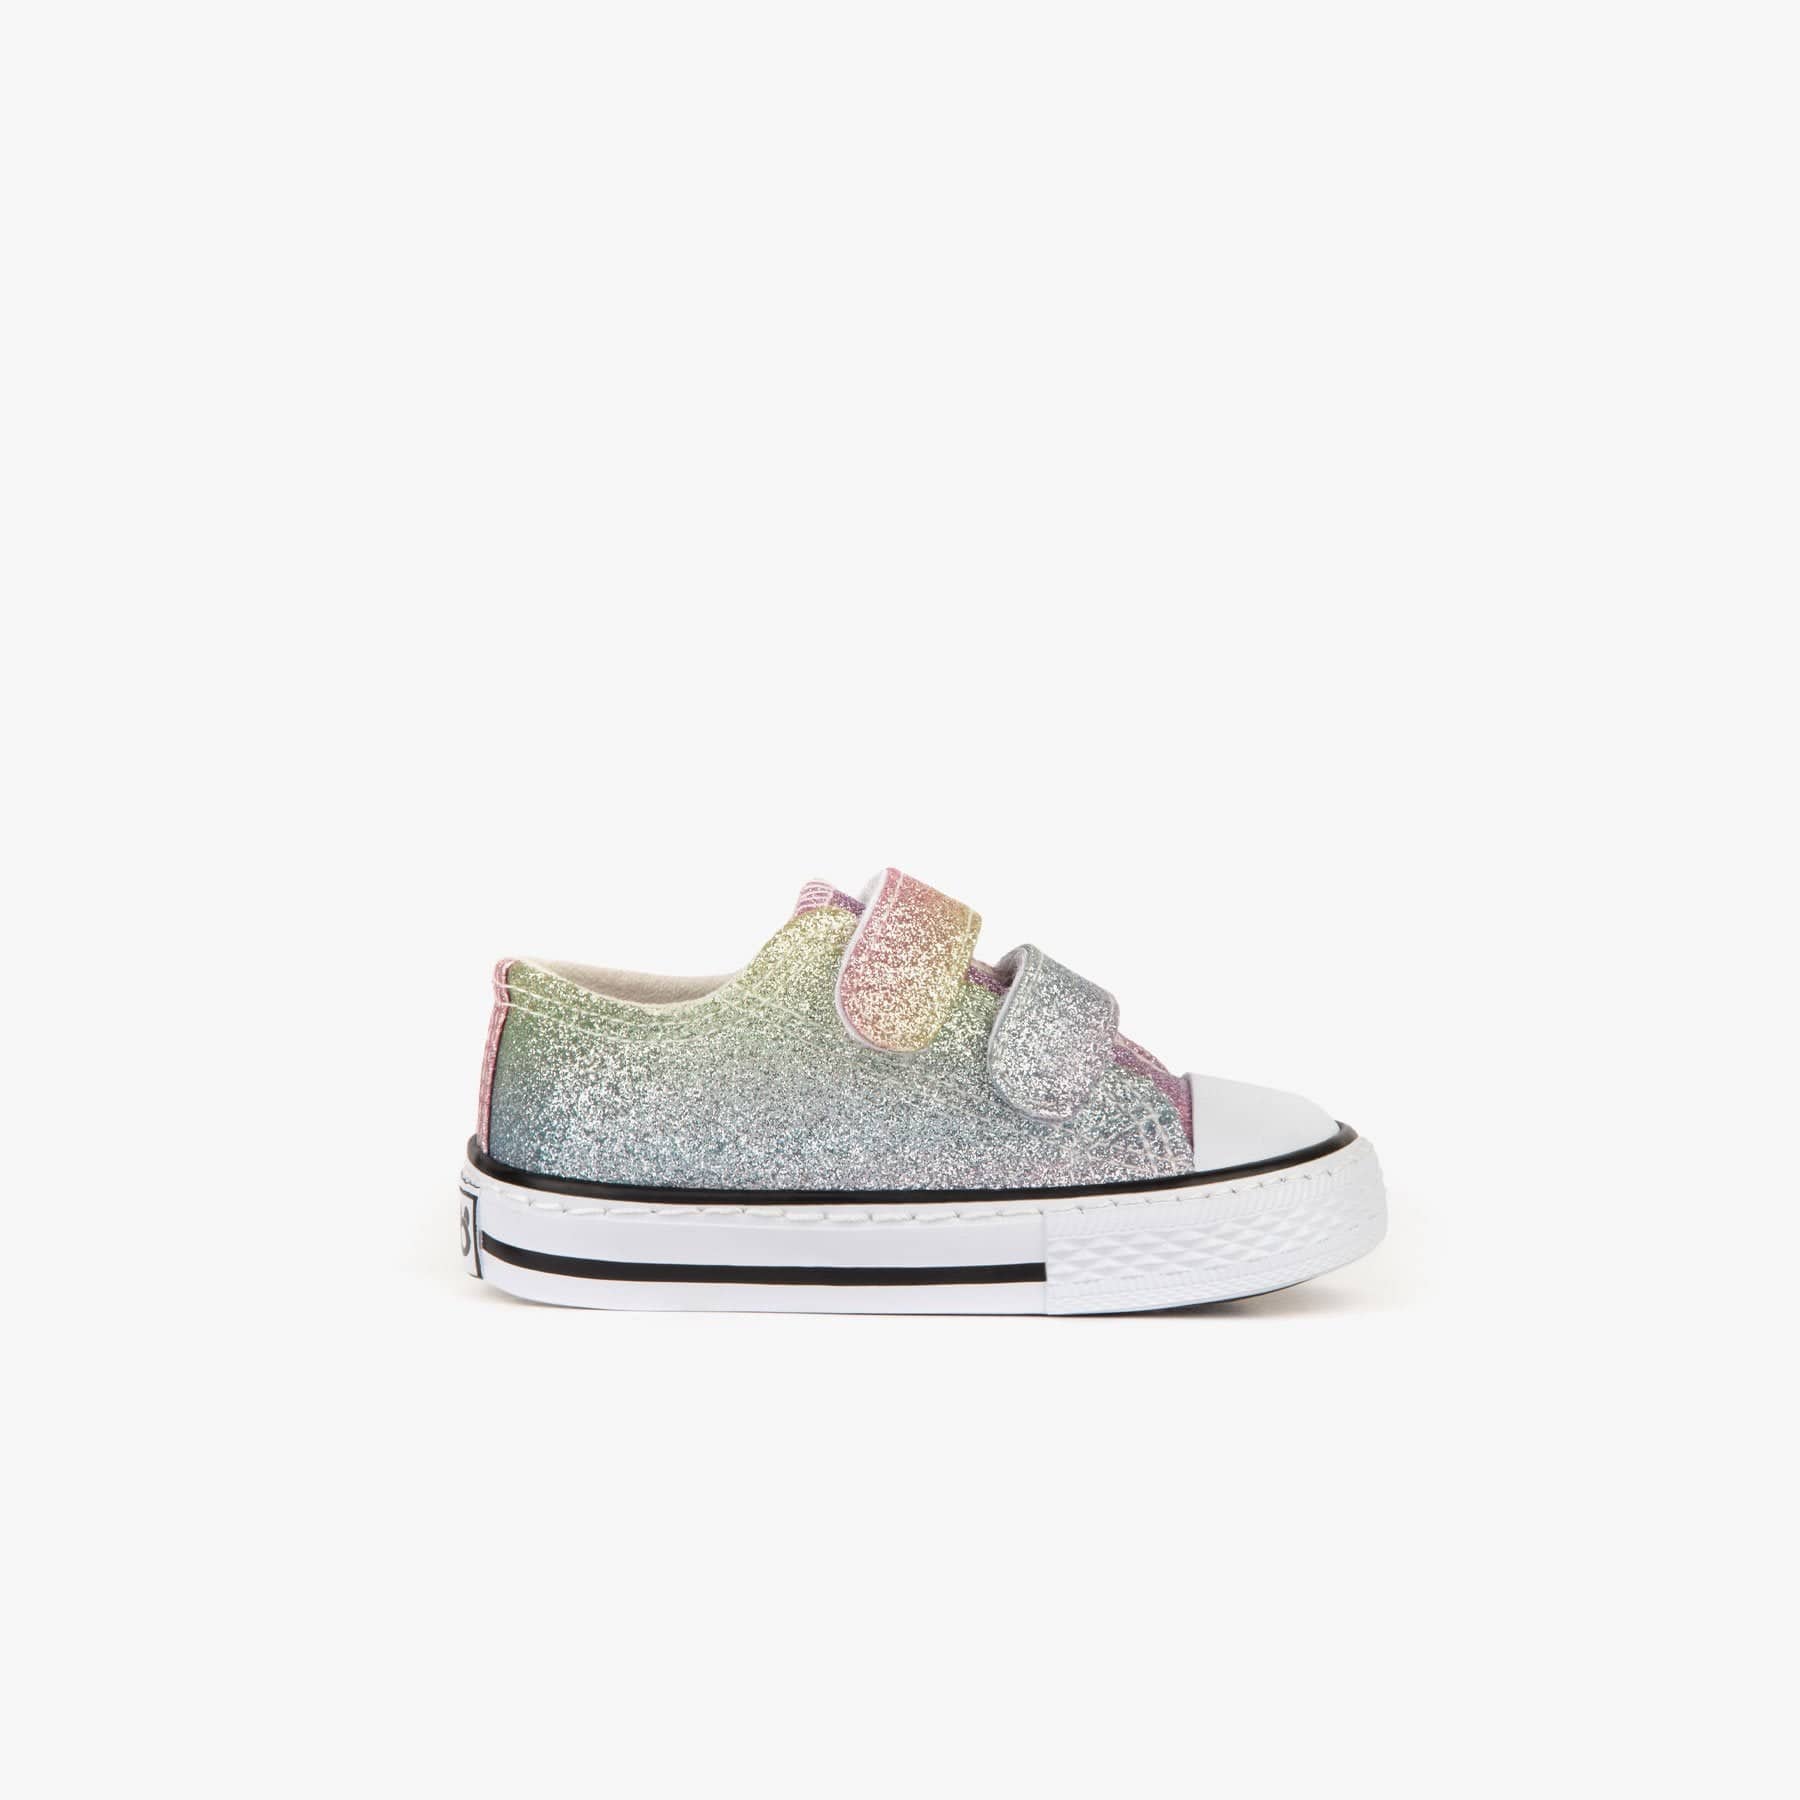 OSITO Shoes Baby's Multicolor Glitter Sneakers